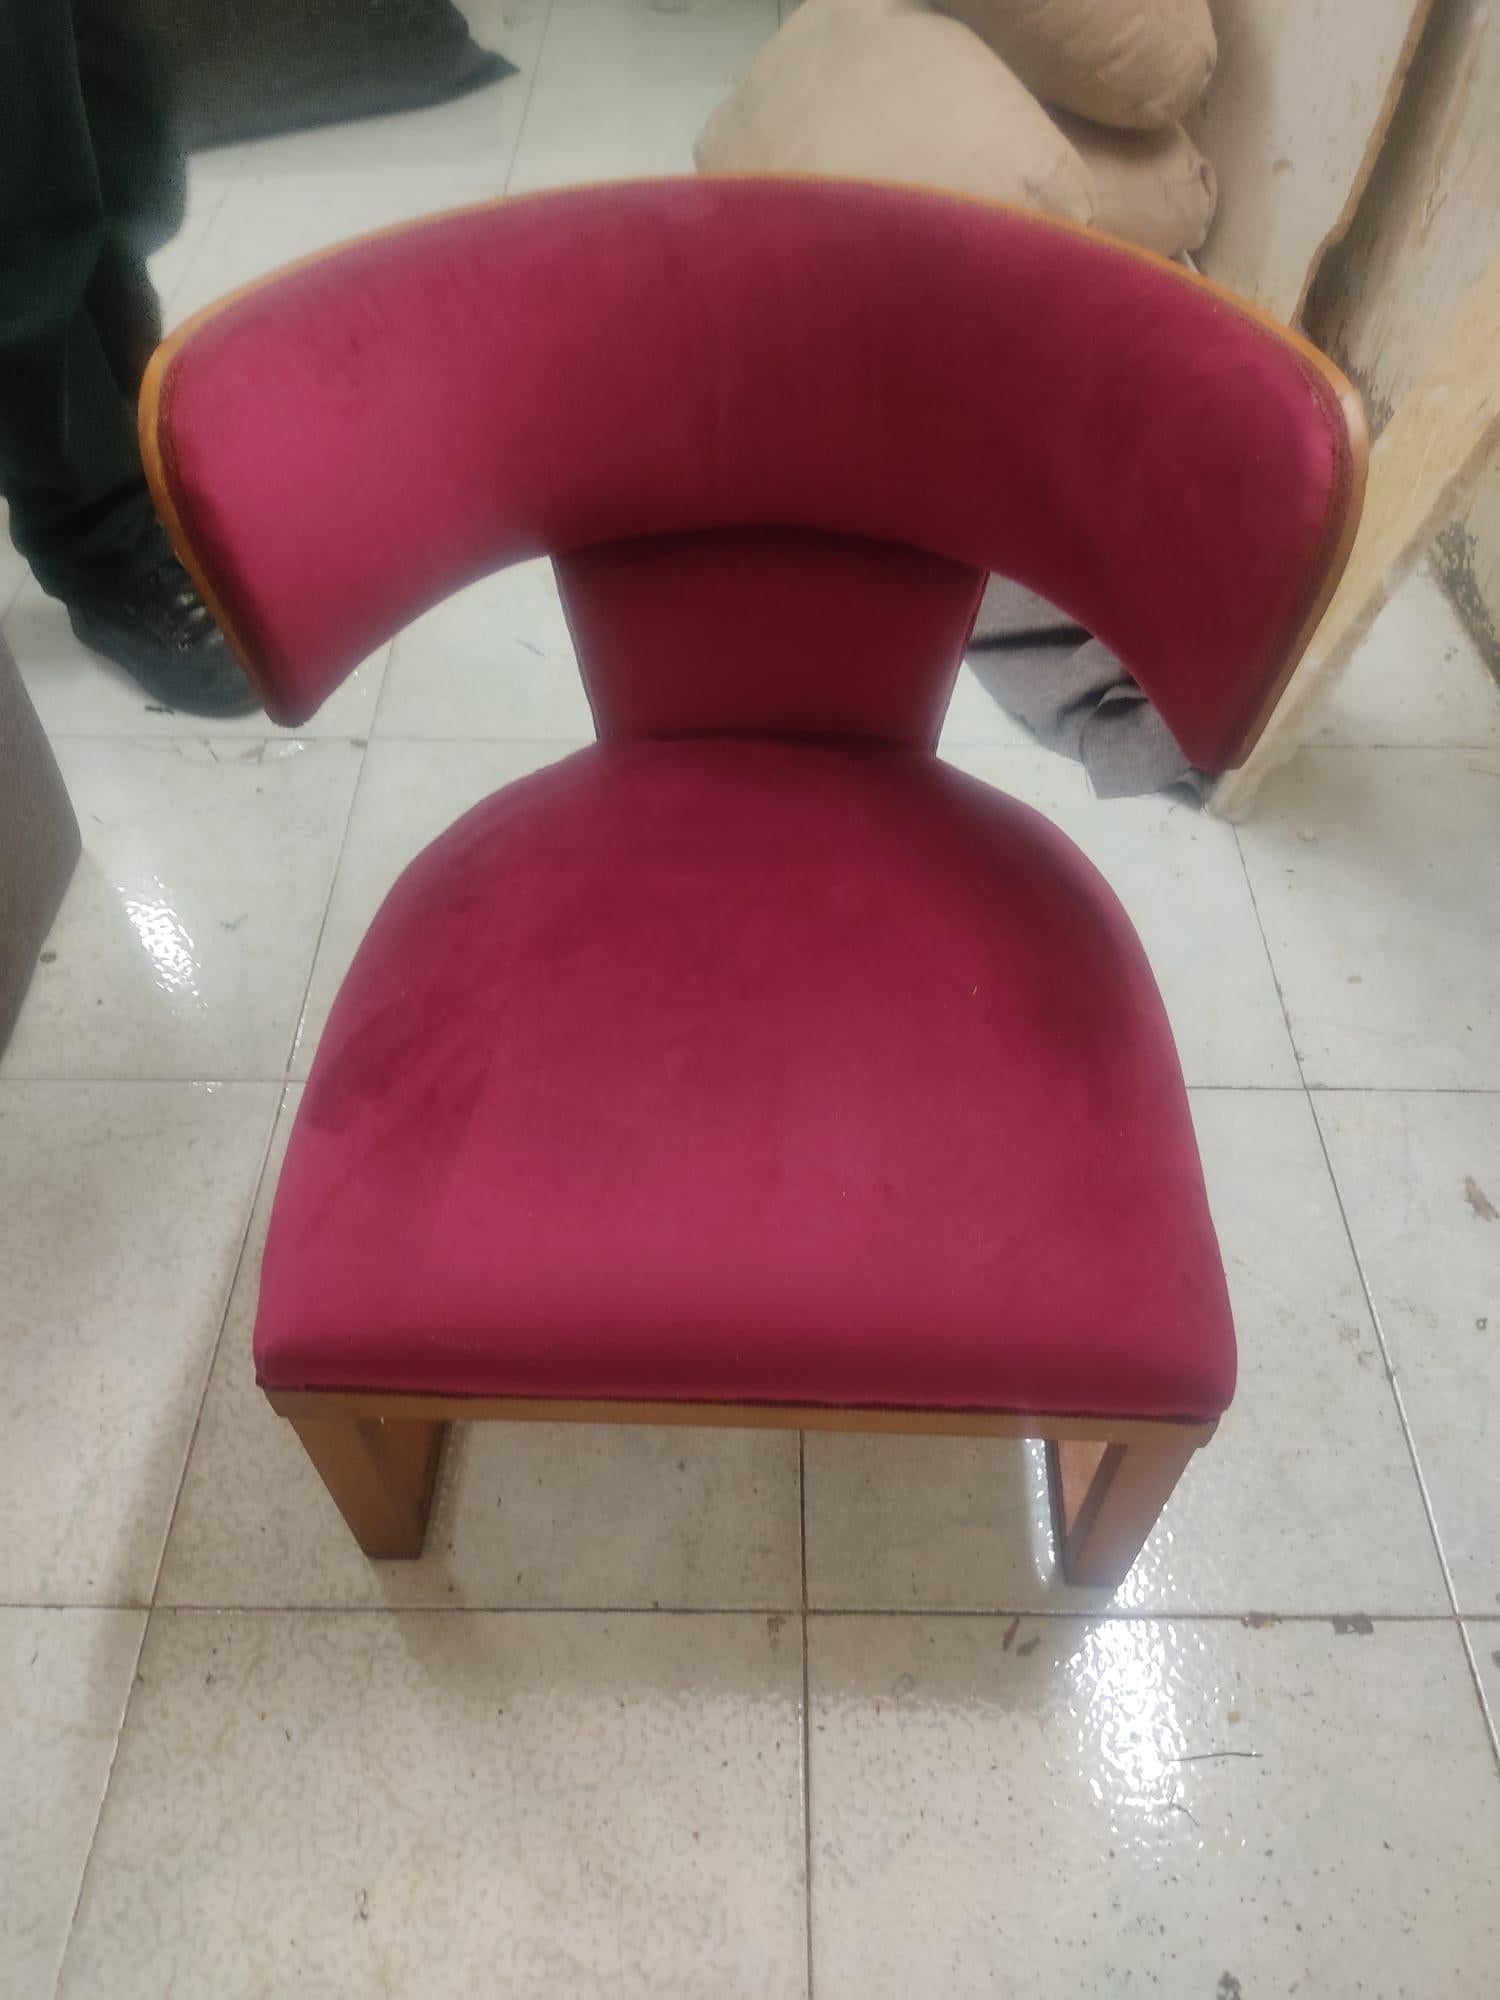 Mid-20th Century Art Deco armchair by Ernesto Lapadula 1930s made of Walnut wood and Fuchsia velvet For Sale